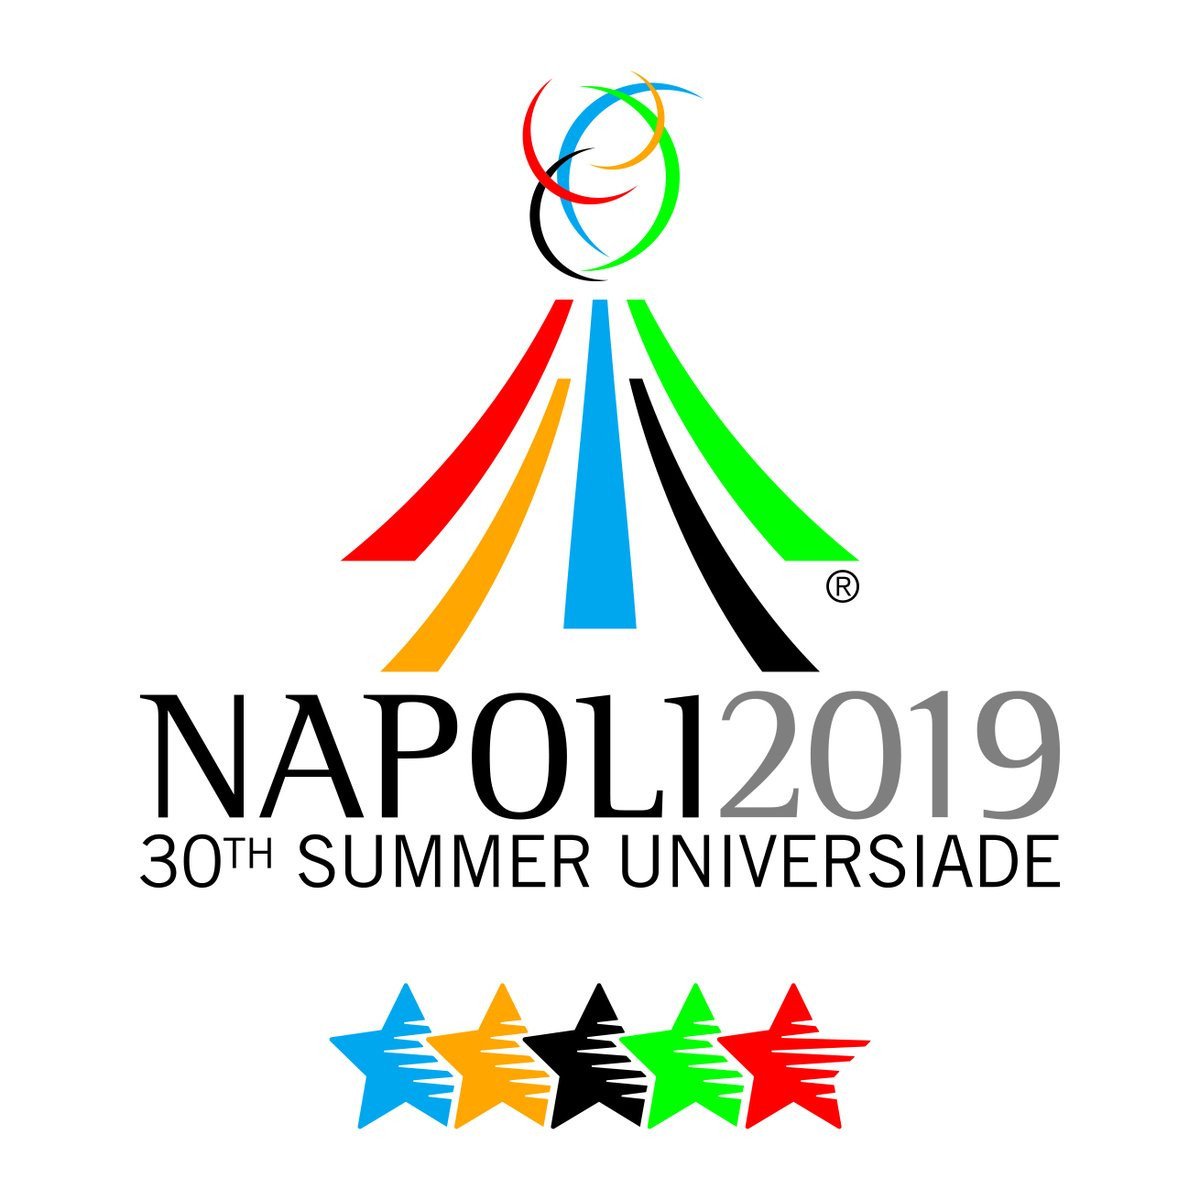 Brett Ormsby and James Graham have been named the Head Coaches for the Team USA Men and Women at the 30th Summer World University Games this summer in Naples, Italy. Find out the rest of the coaching staffs below. 

MORE: usawaterpolo.org/news/2019/3/4/… … @FISU @Napoli2019_ita